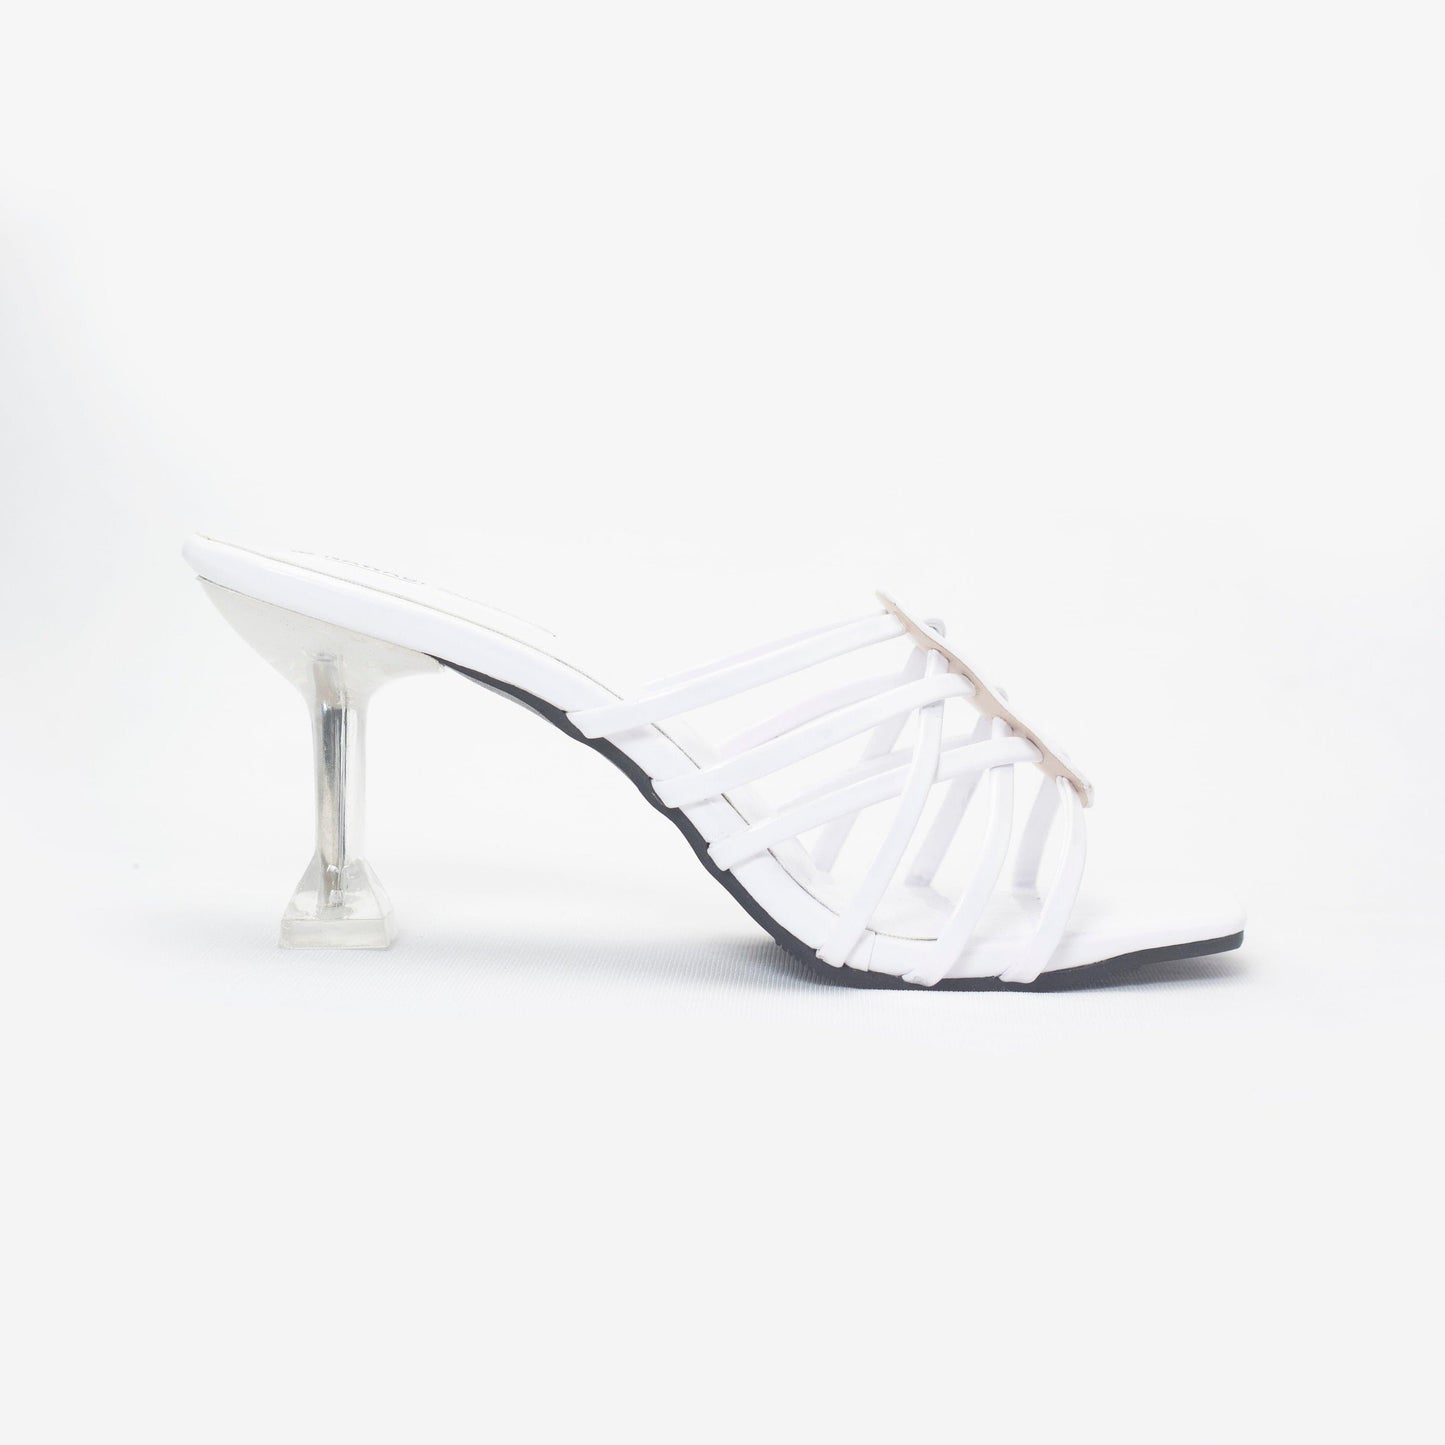 3 inch white clear heel shoes-nawabi shoes bd